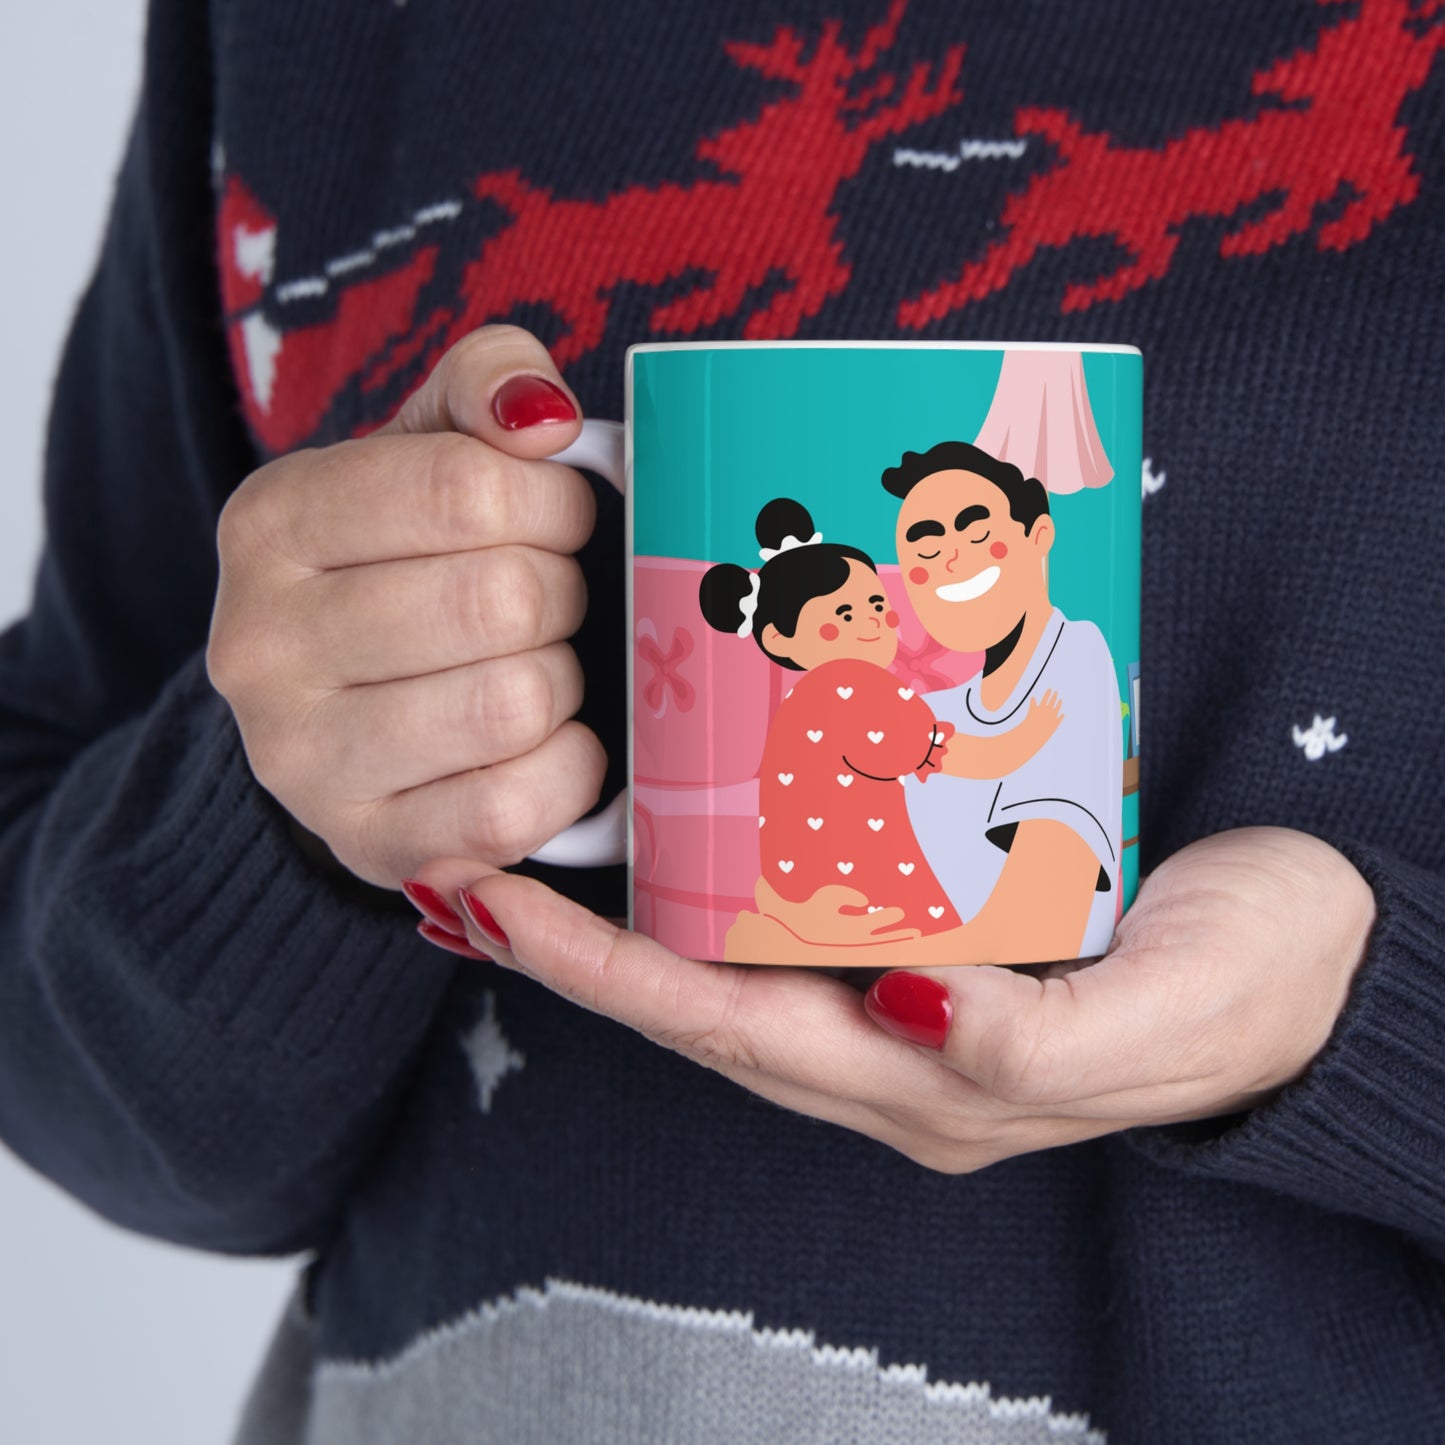 “YOU ARE MY HERO, DAD” on one side and a happy time shared by dad and daughter. Part of several mugs to choose from depending on what resonates with you.